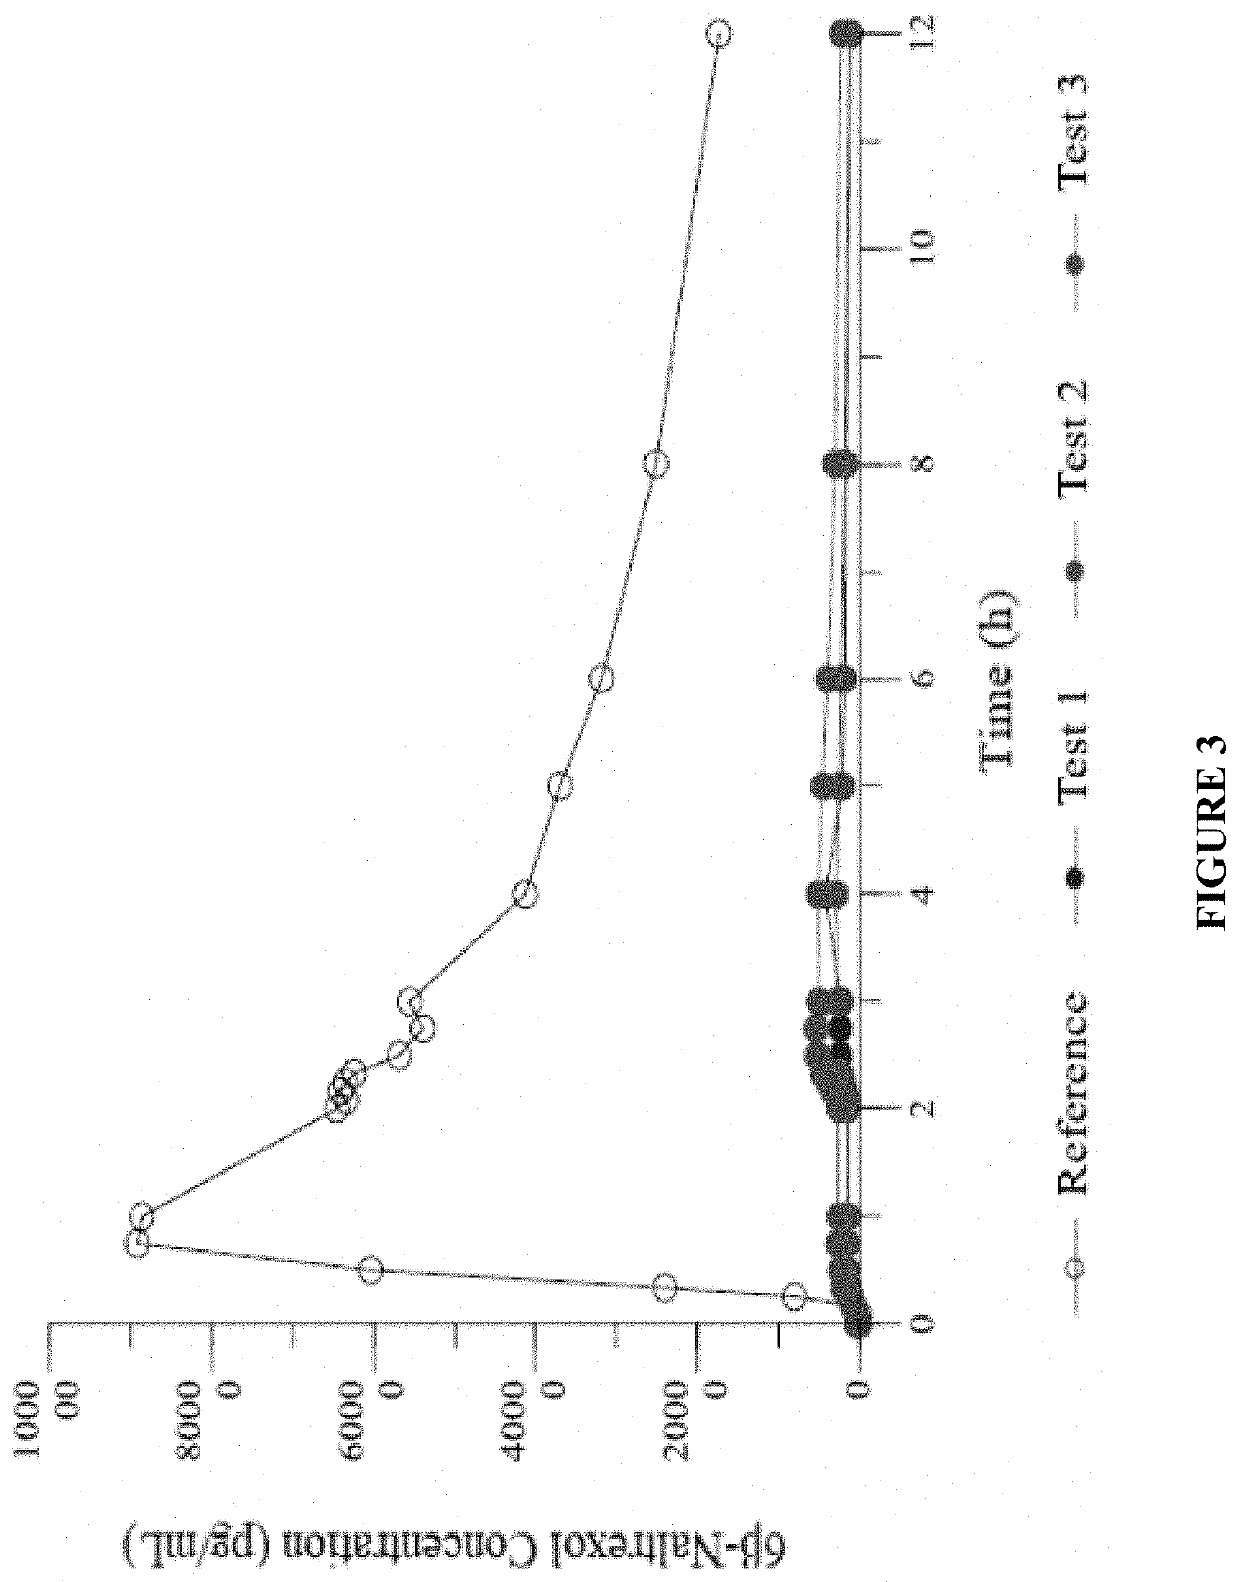 Compositions, devices, and methods for the treatment of overdose and reward-based disorders